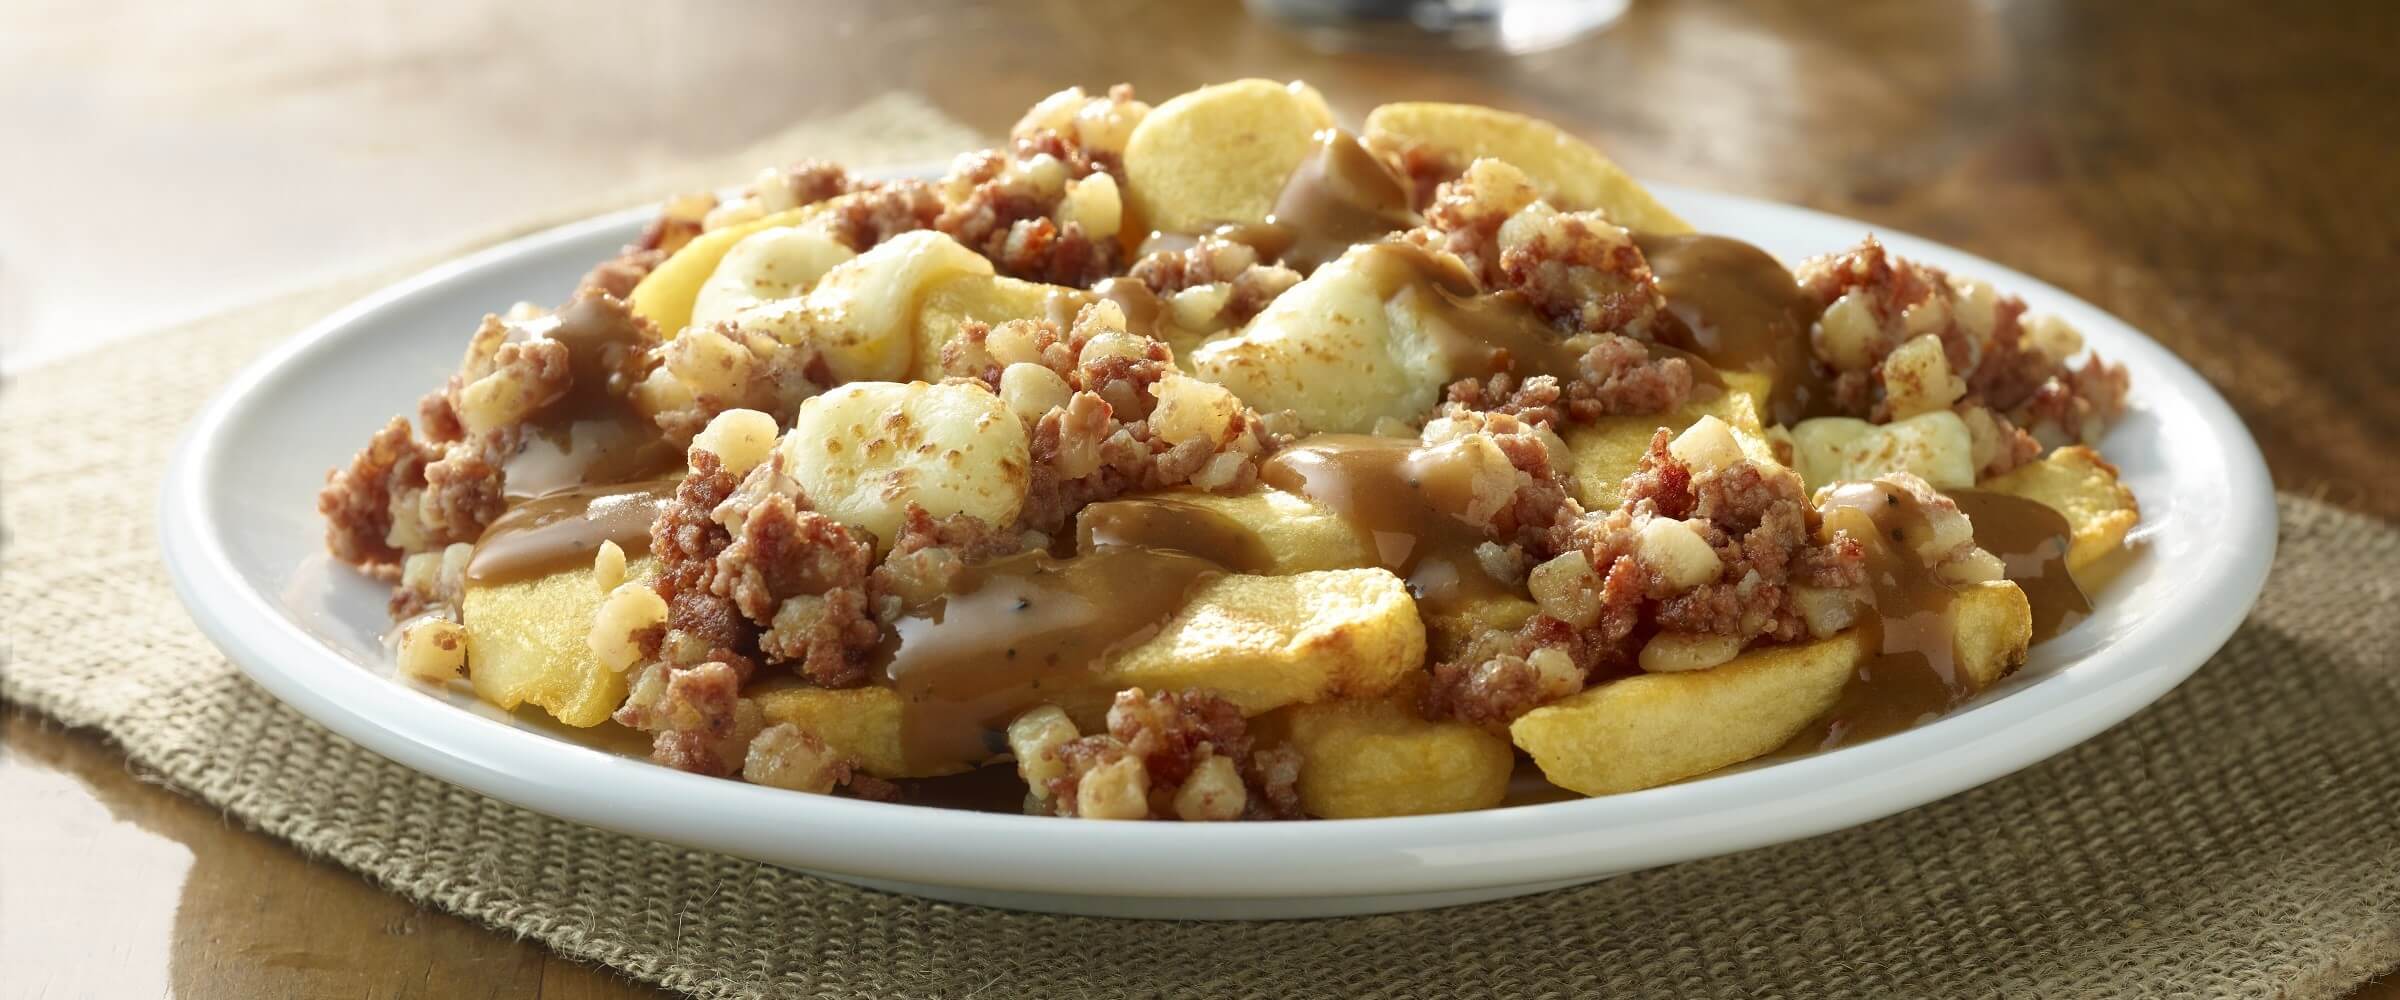 Corned beef hash poutine on white plate